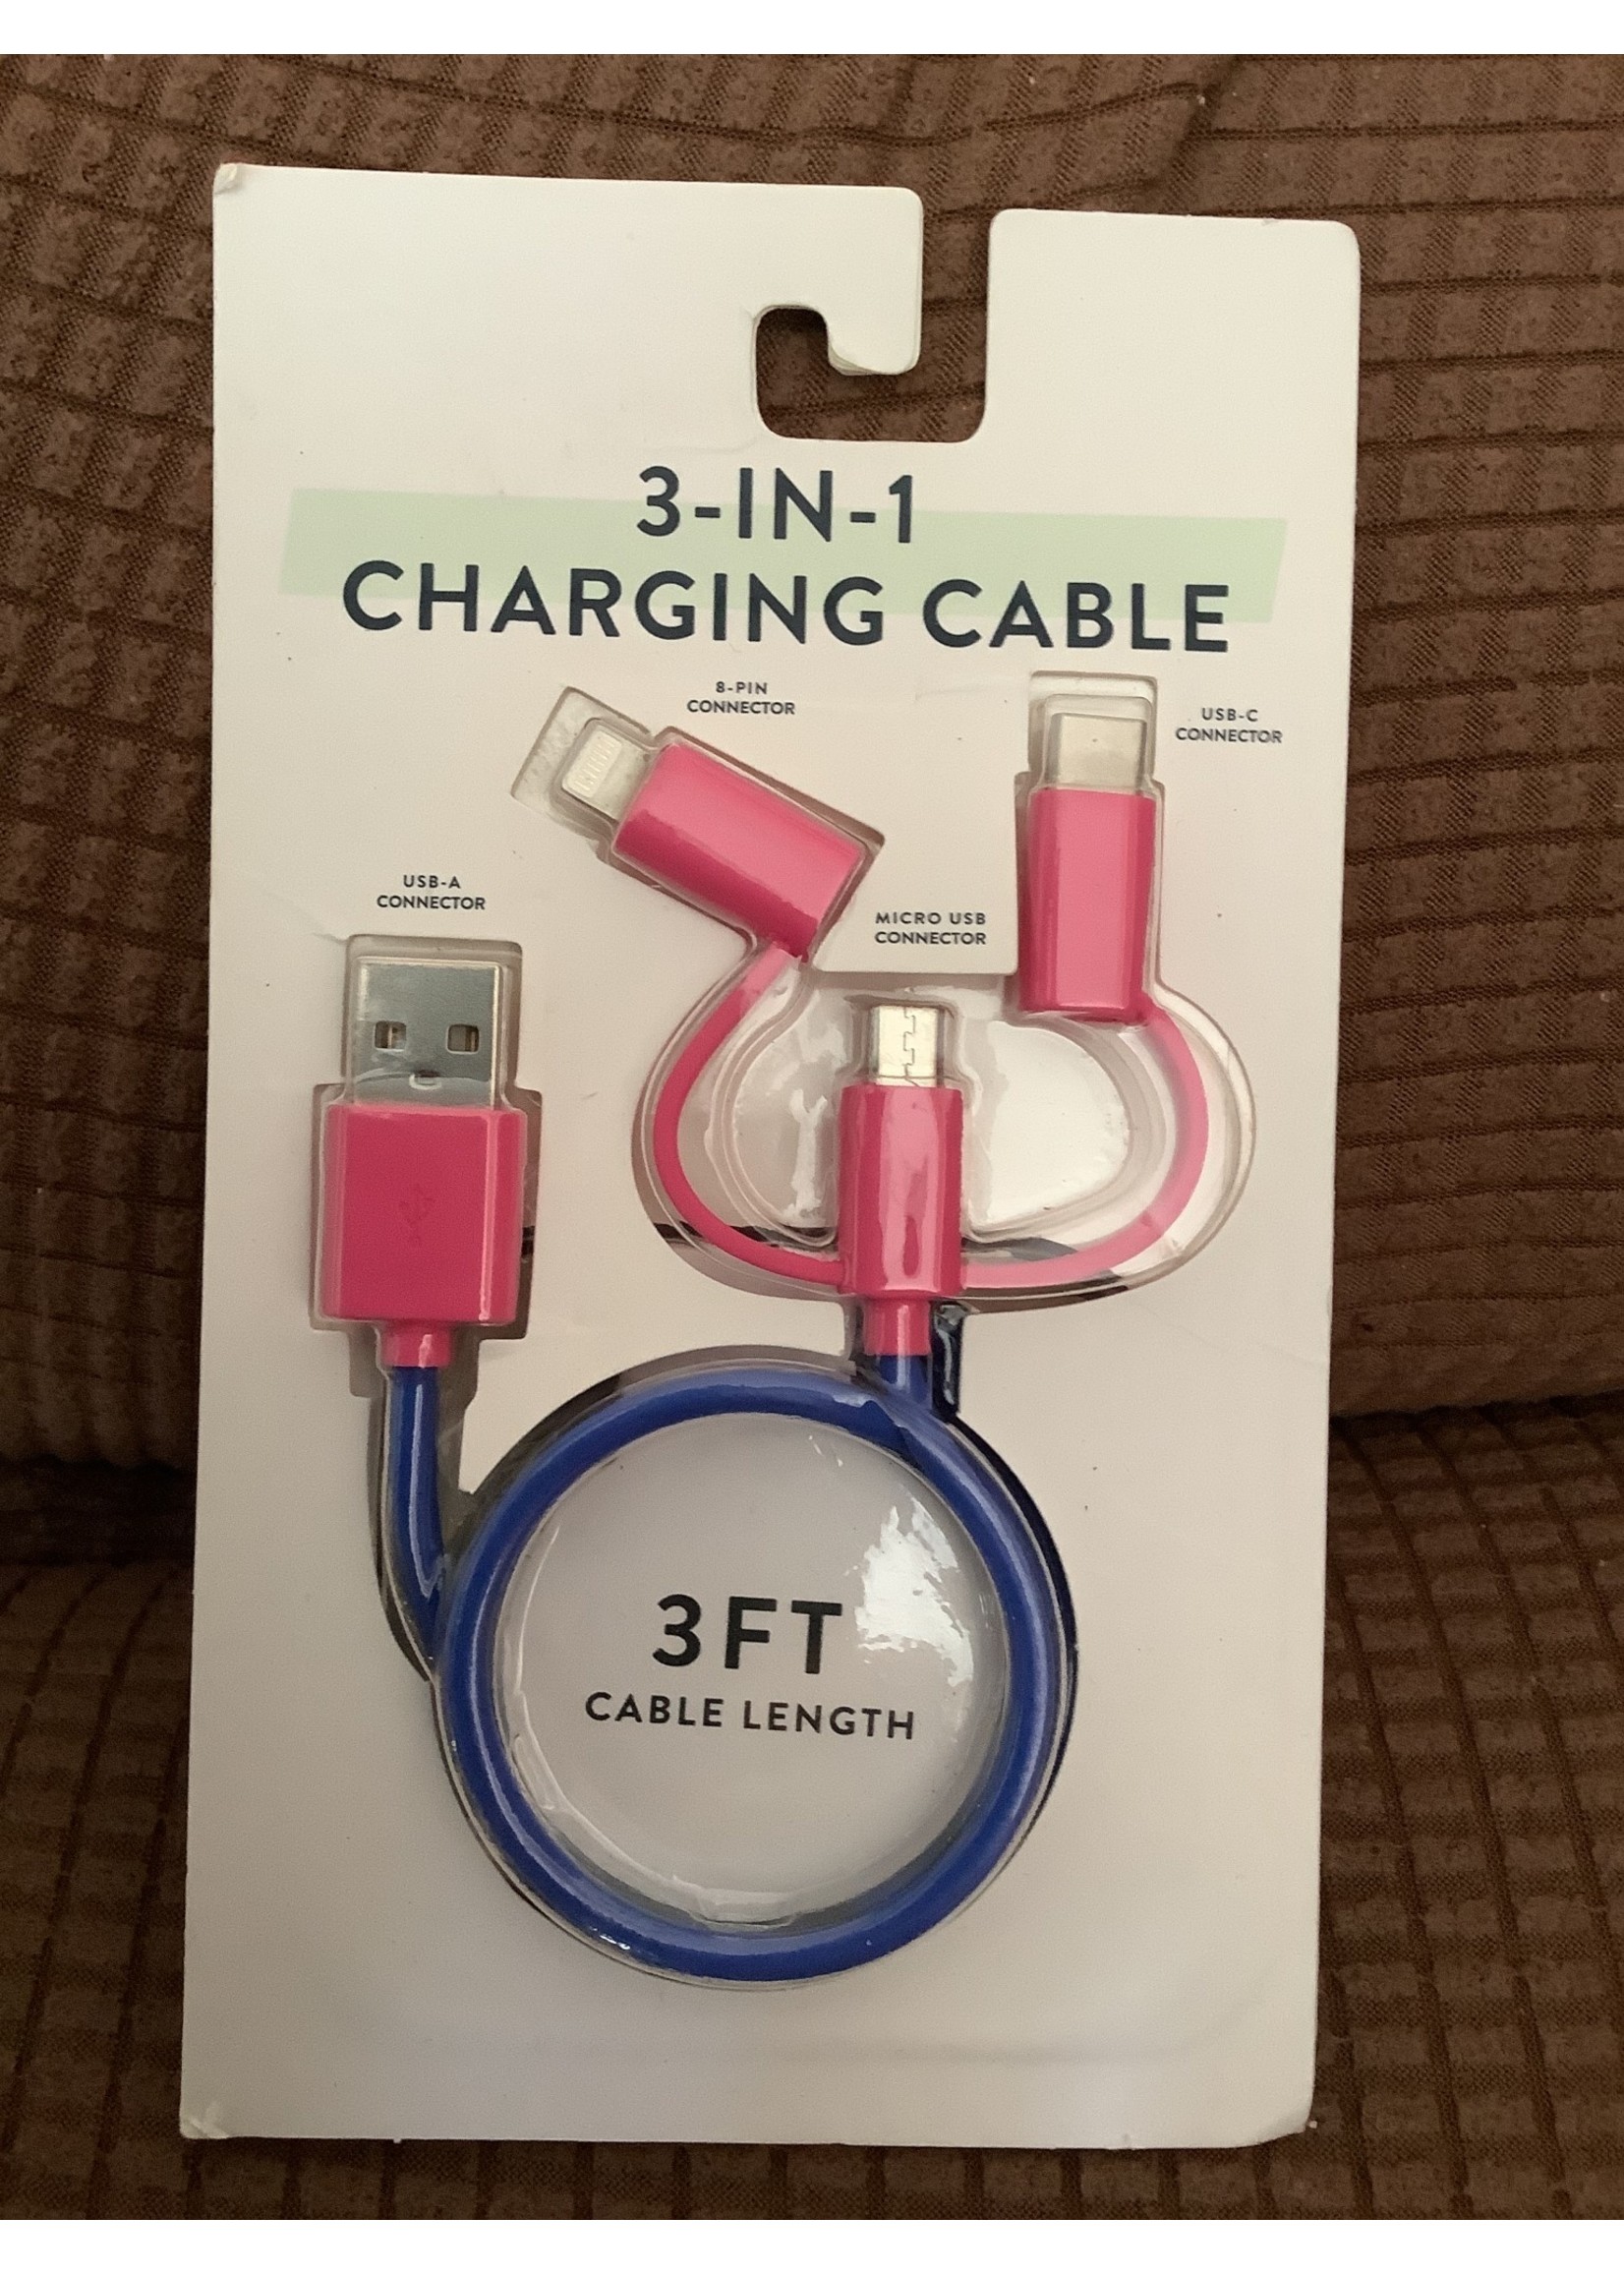 3–in-1 3ft Charging Cable USB-A, Micro USB, USB-C, 8 Pin Lightning Pink/Blue